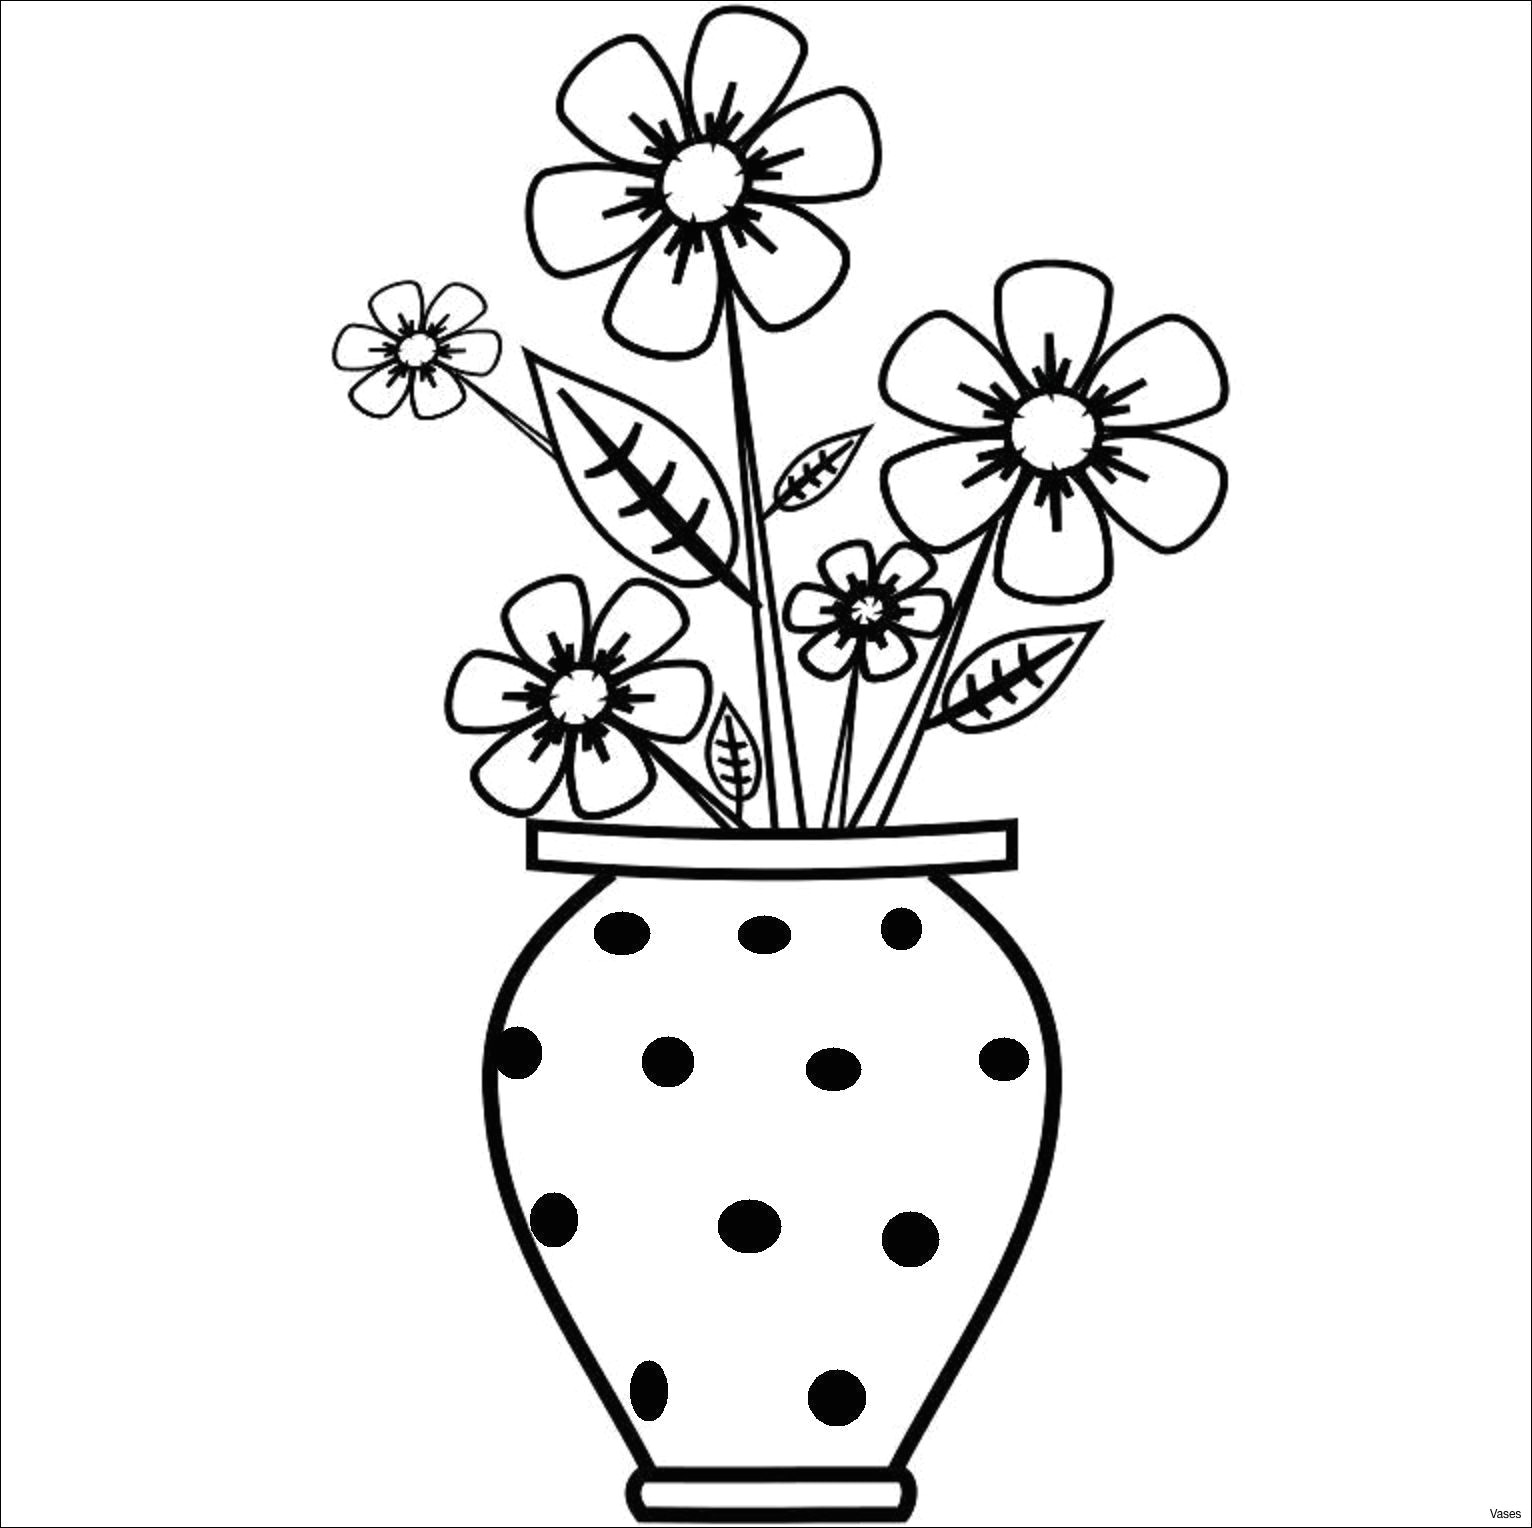 images of easy drawings vase art drawings how to draw a vase step 2h vases by